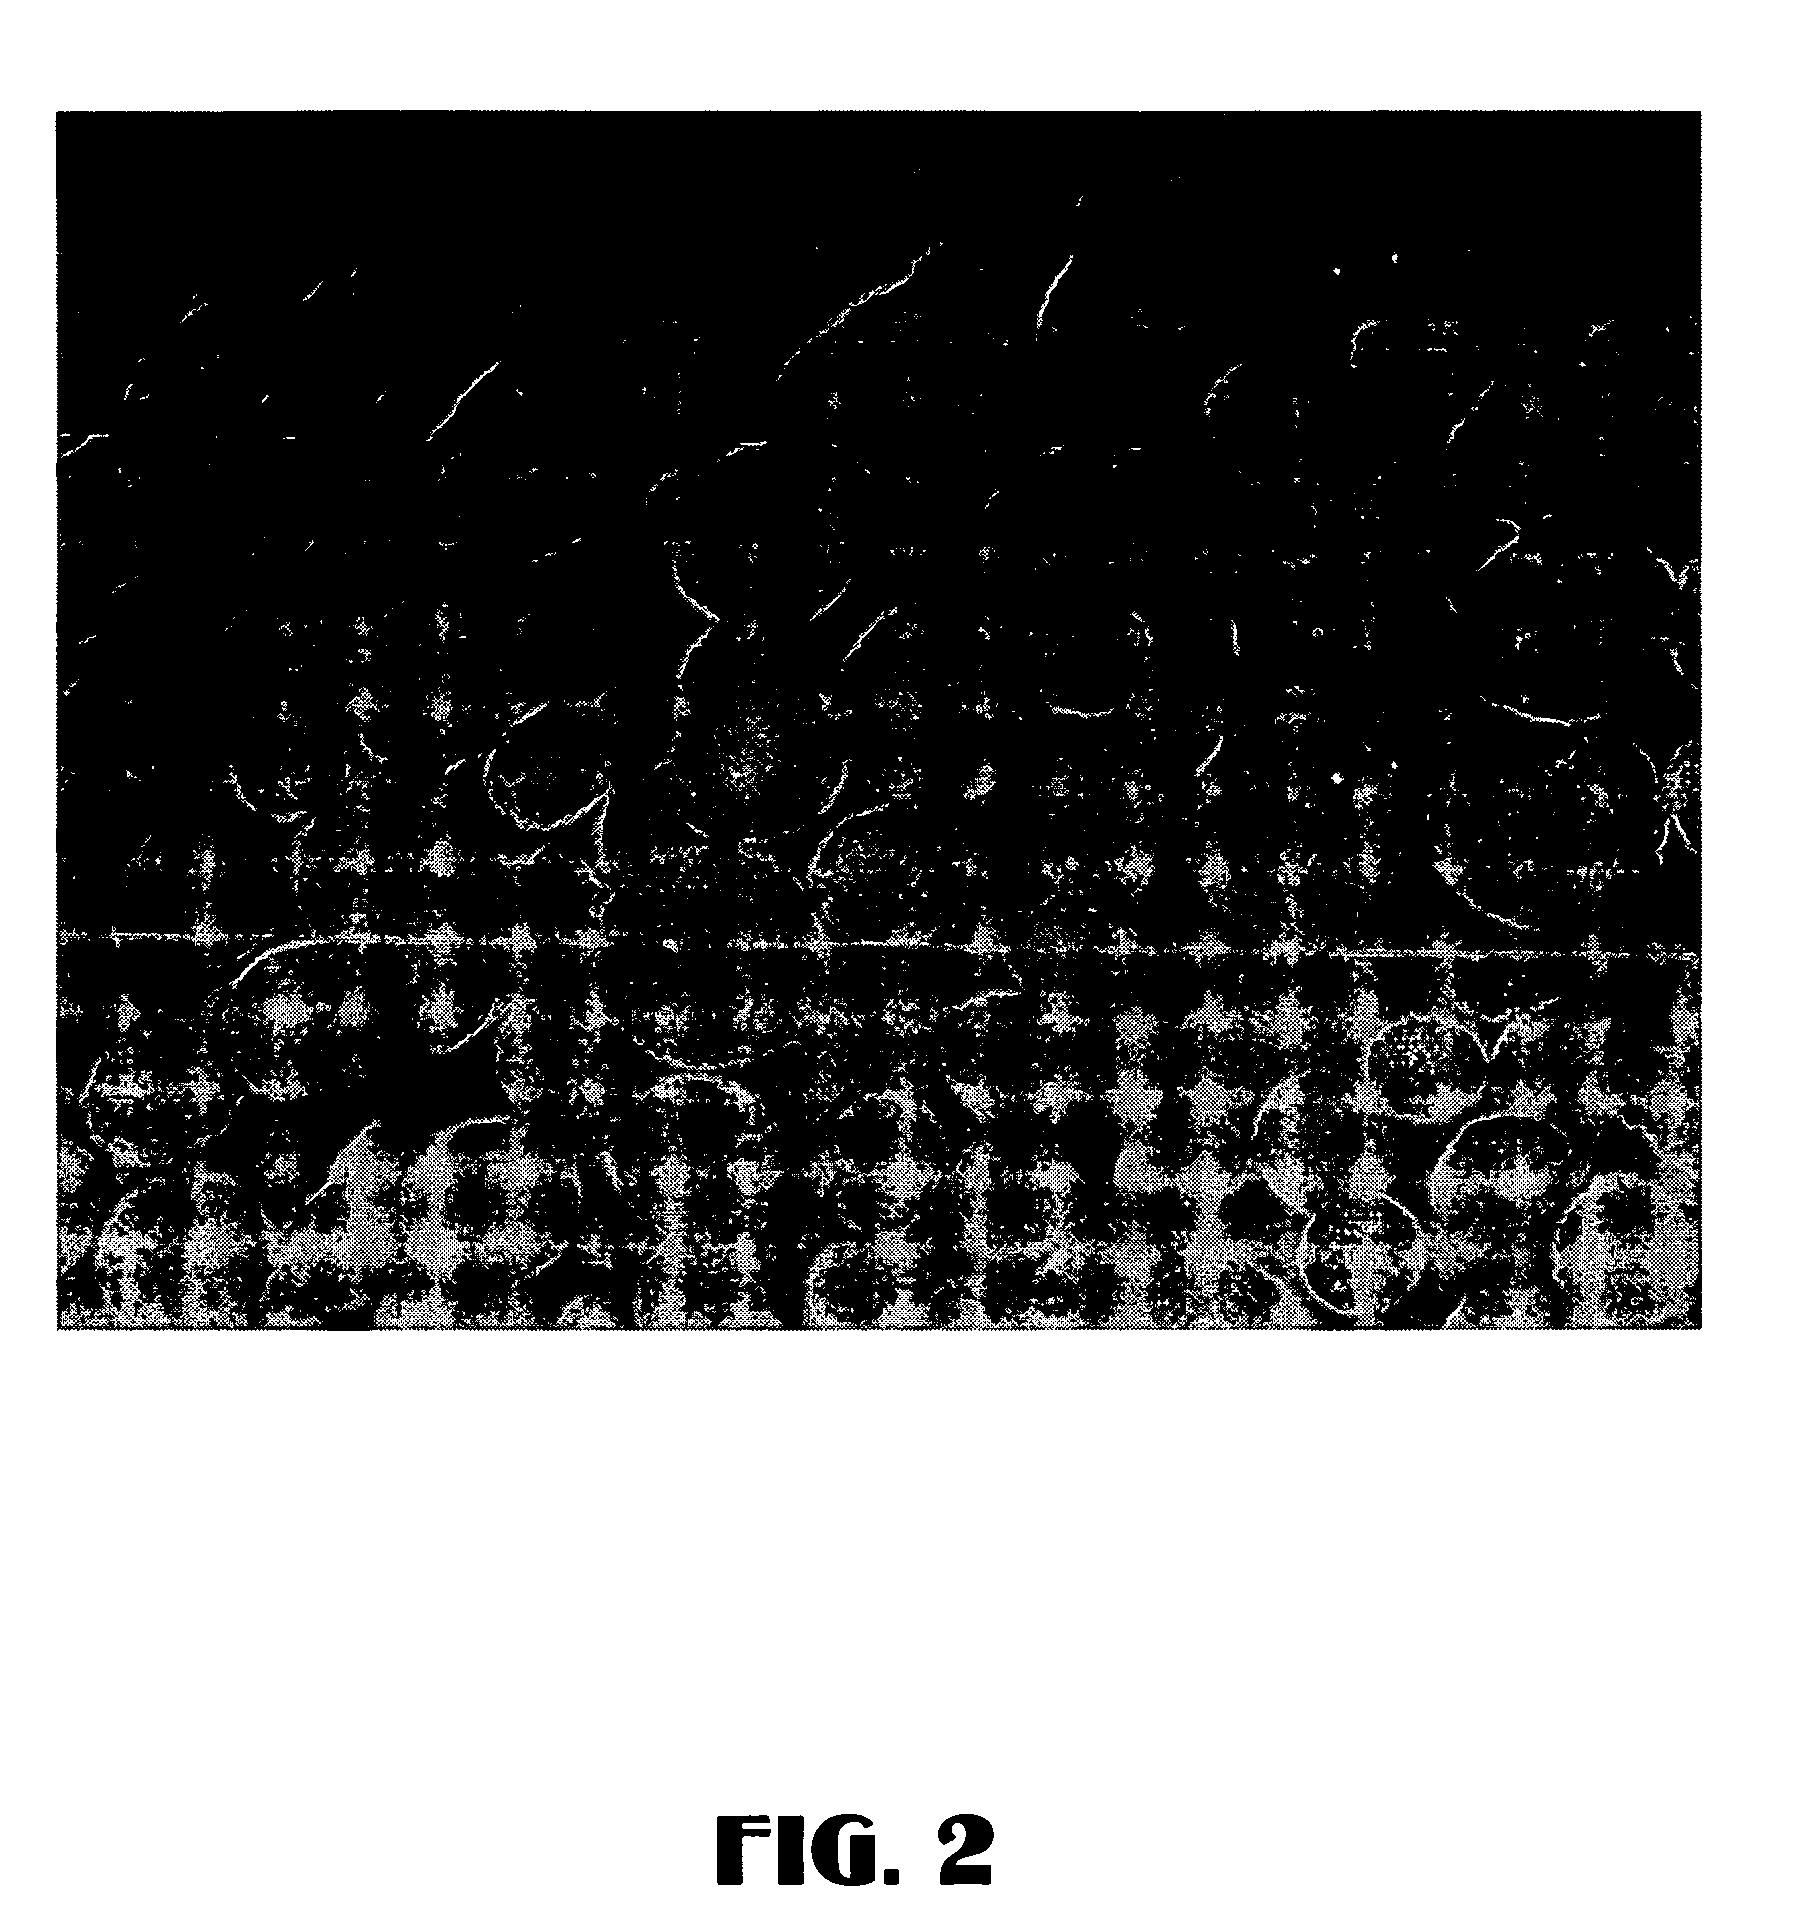 Ziegler-natta catalyst and method for making and using same